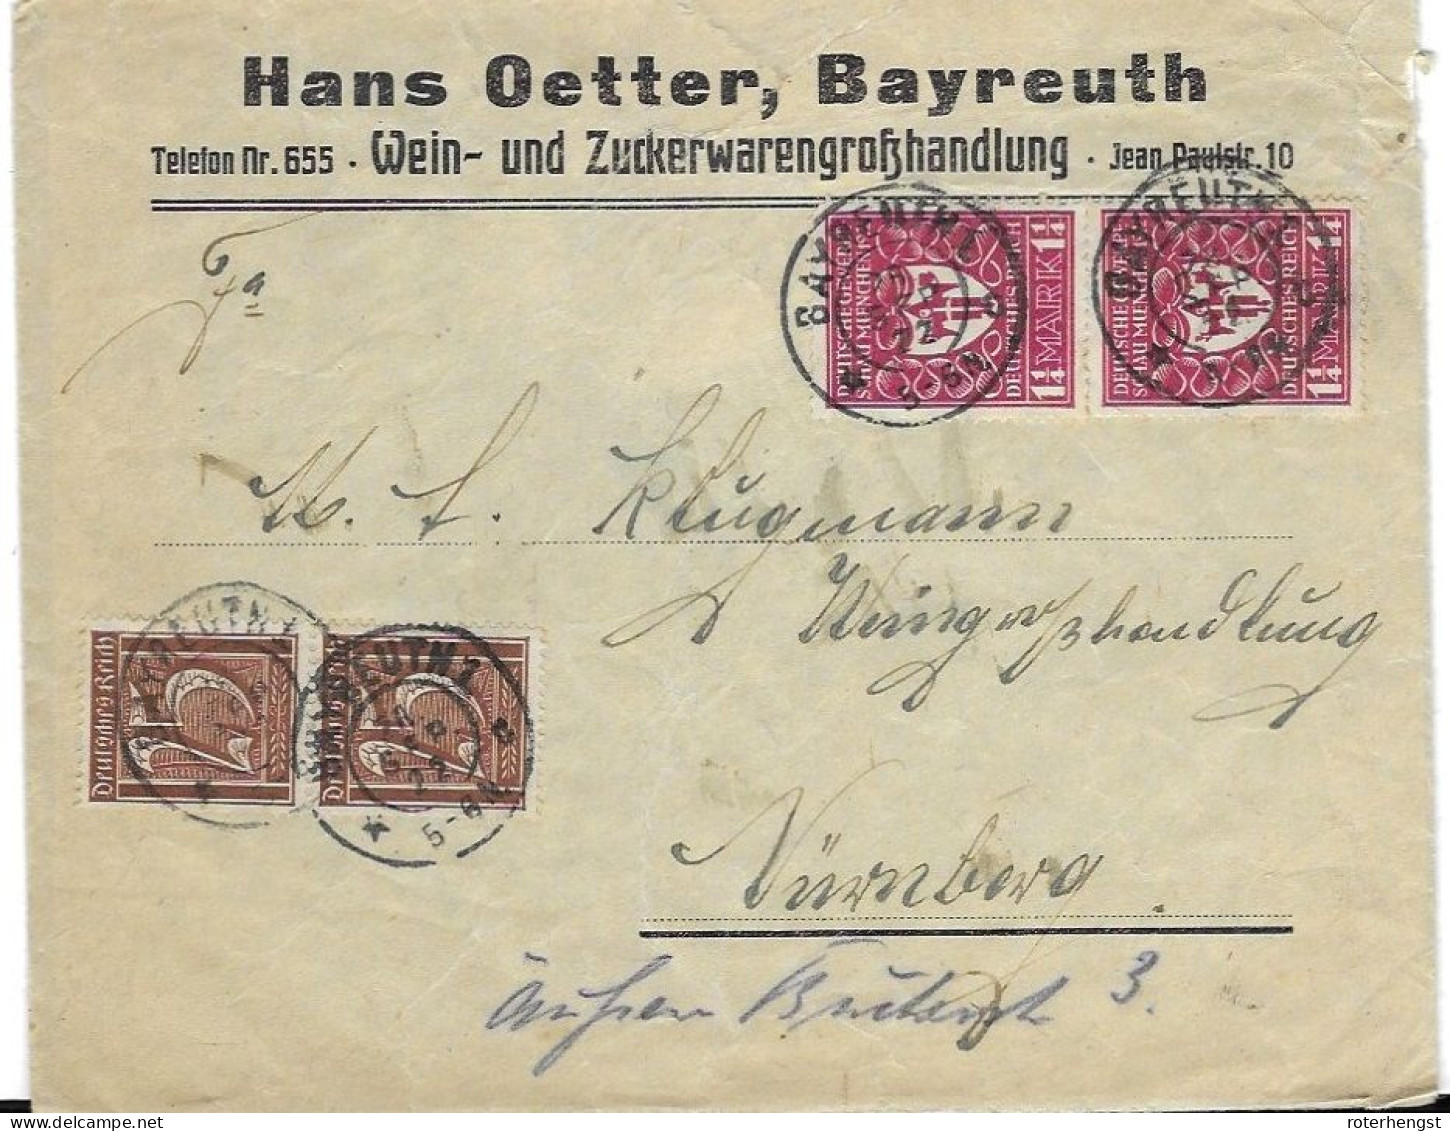 Germany Inflation Letter Bayreuth 28.9.1922 Wine And Sugar Company Better 25Pf Watermark - Covers & Documents